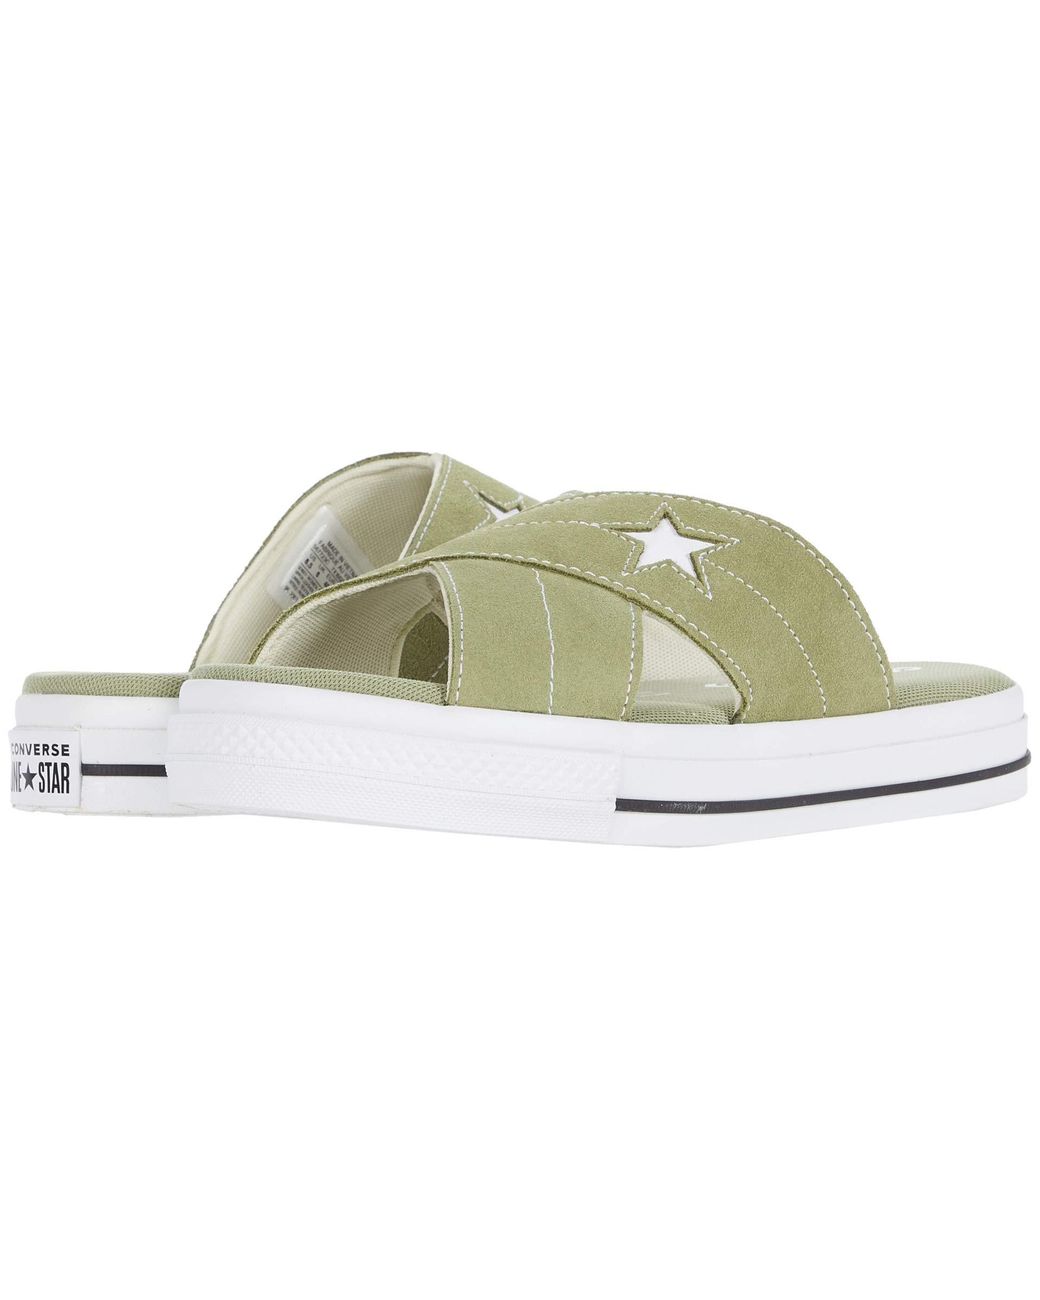 Converse Suede One Star Sandal in Gray (White) | Lyst